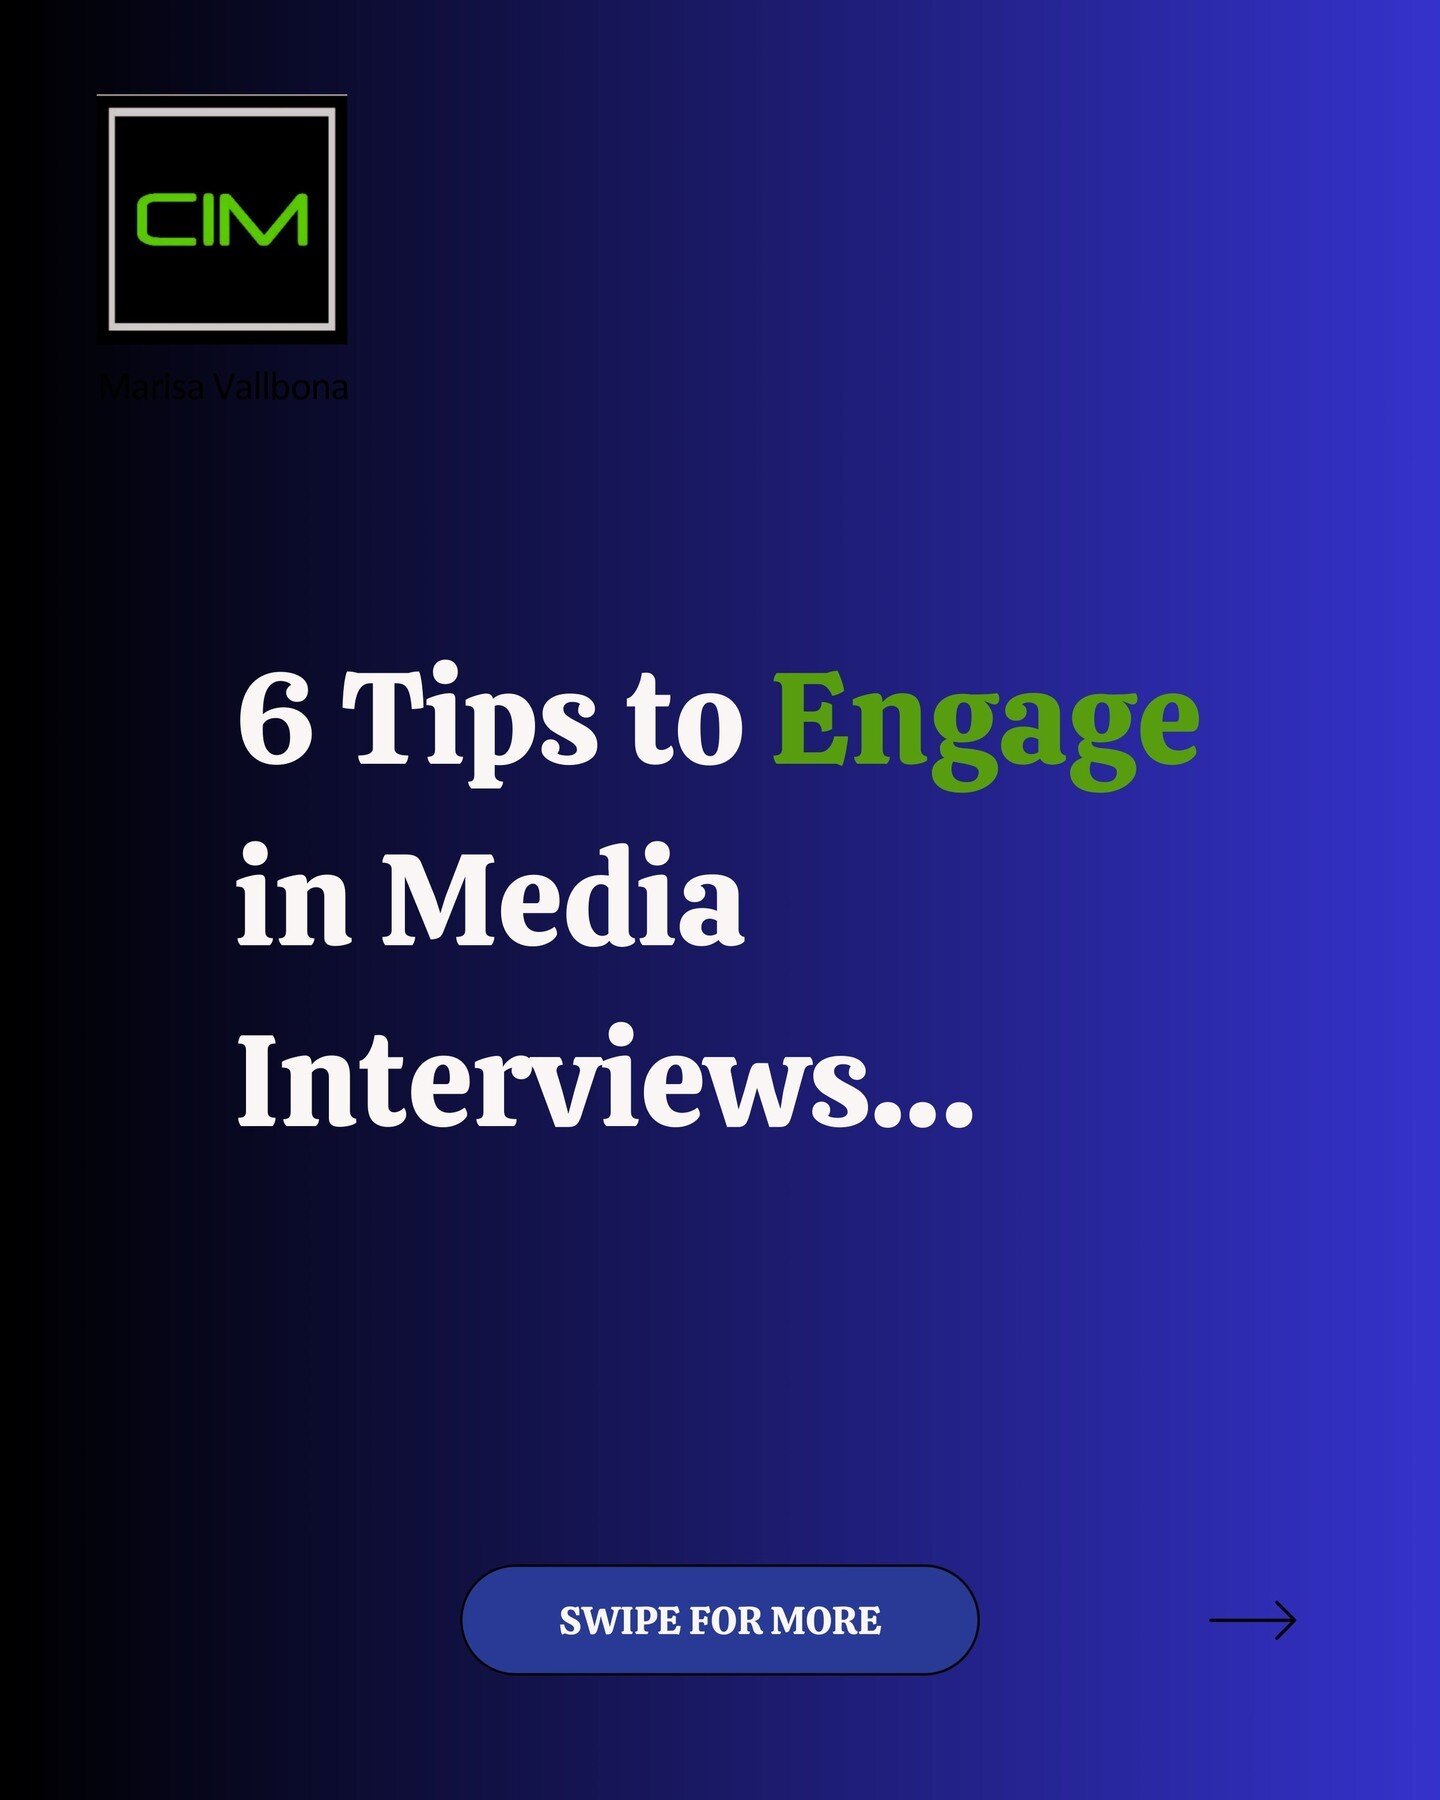 How you can be engaged in media interviews and preform your best:
#PR #publicrelations #interviews #branding #marketing